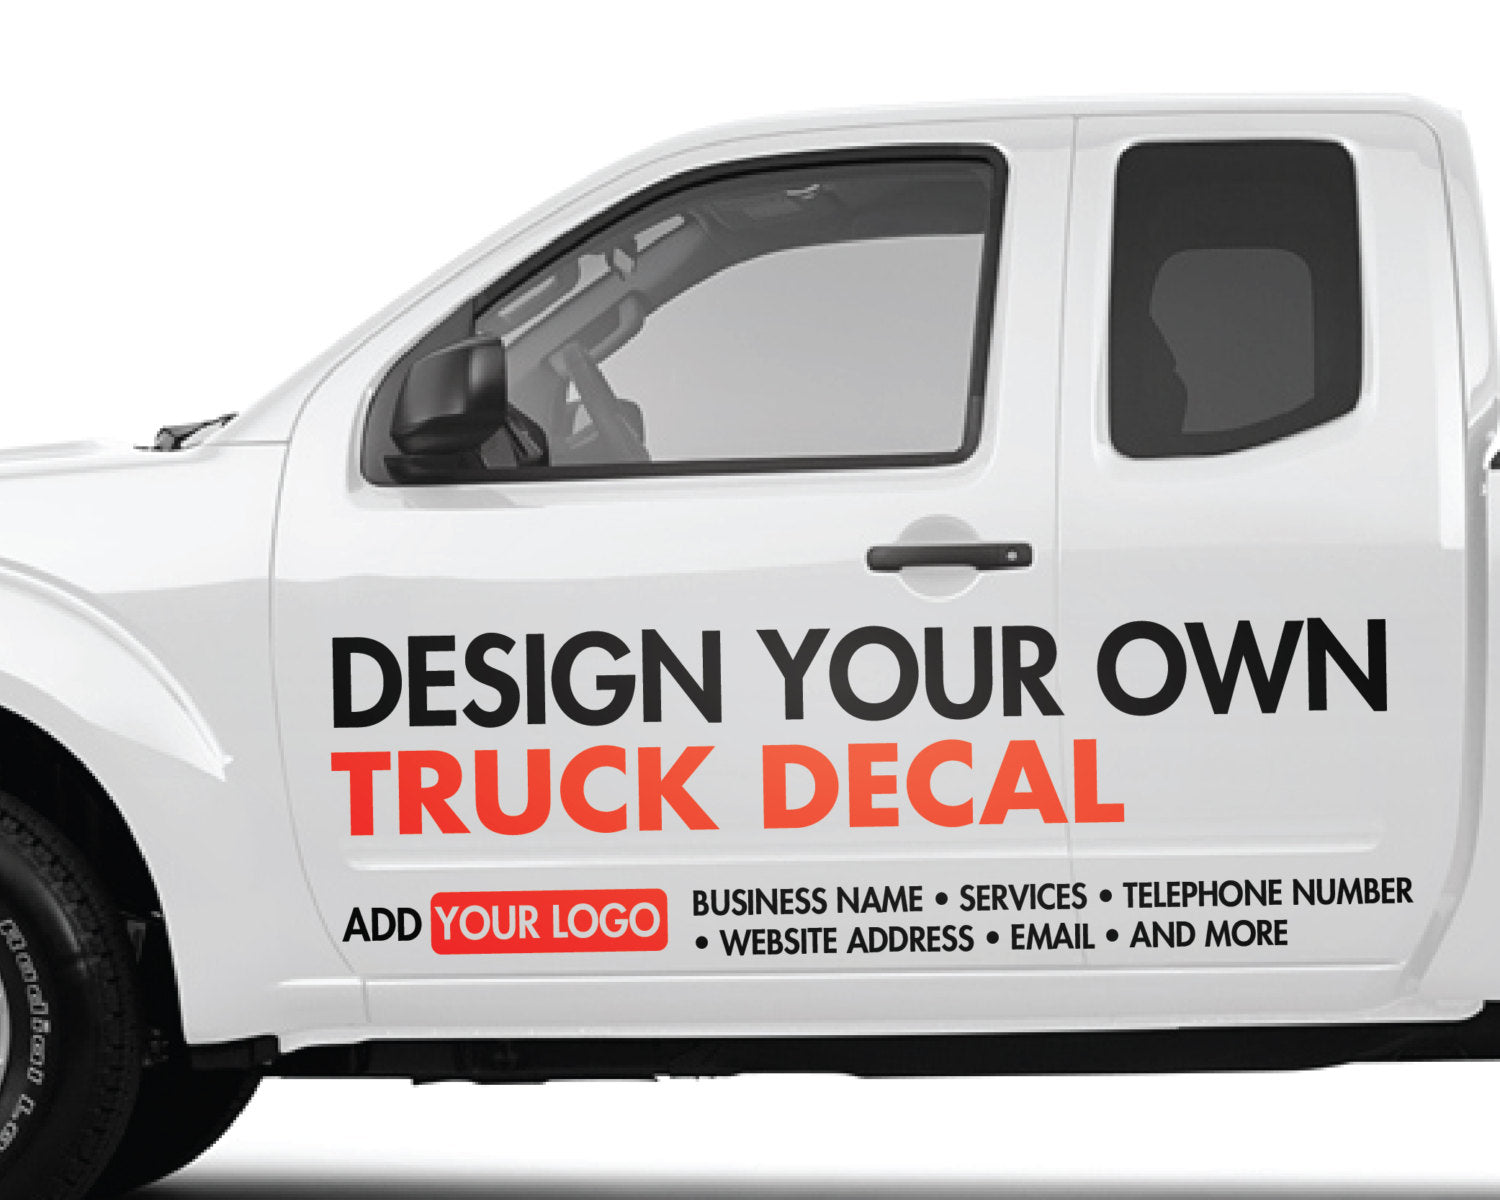 Eye-catching promotional car decals for a product launch, designed online with rapid turnaround shipping.